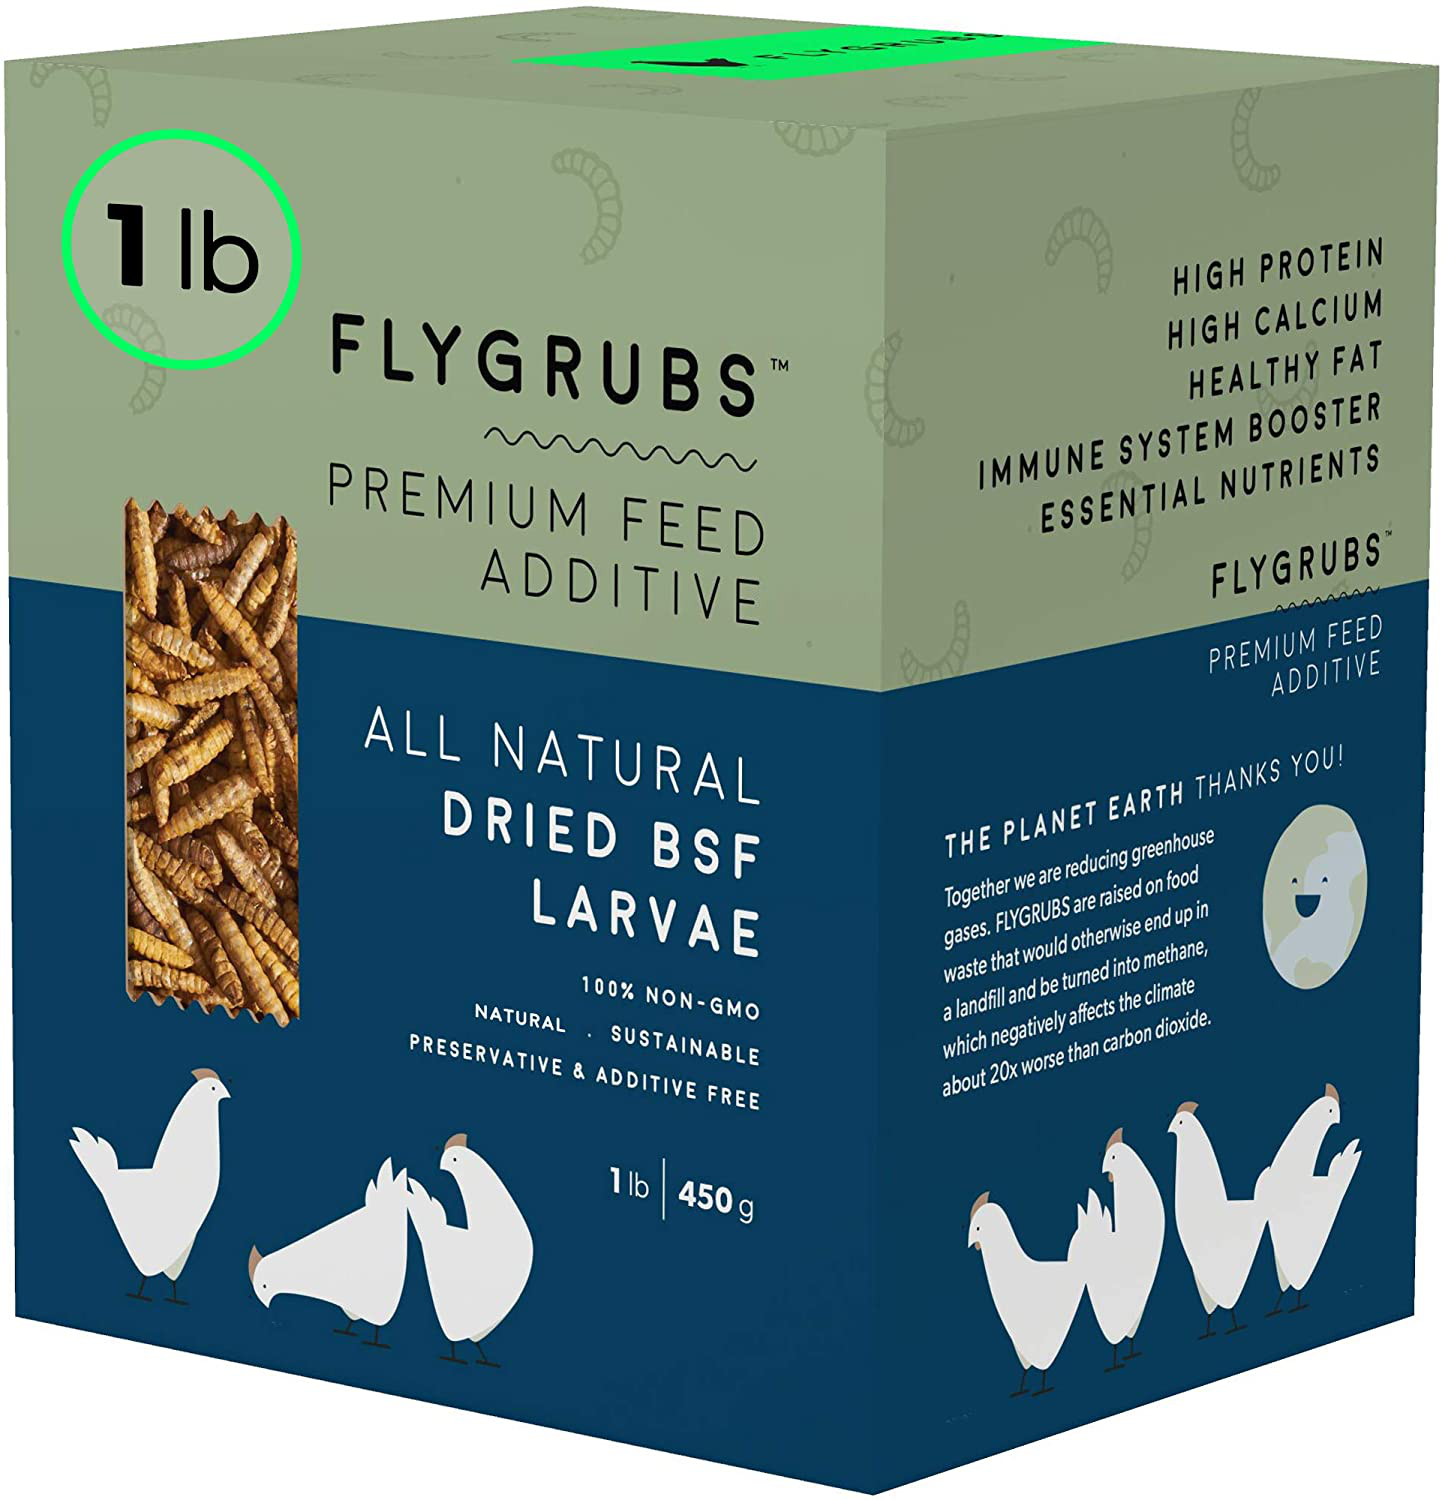 FLYGRUBS Superior to Dried Mealworms for Chickens (5 Lbs & 1Lb) - Non-Gmo - 85X More Calcium than Meal Worms - Chicken Feed & Molting Supplement - BSF Larvae Treats for Hens, Ducks, Birds